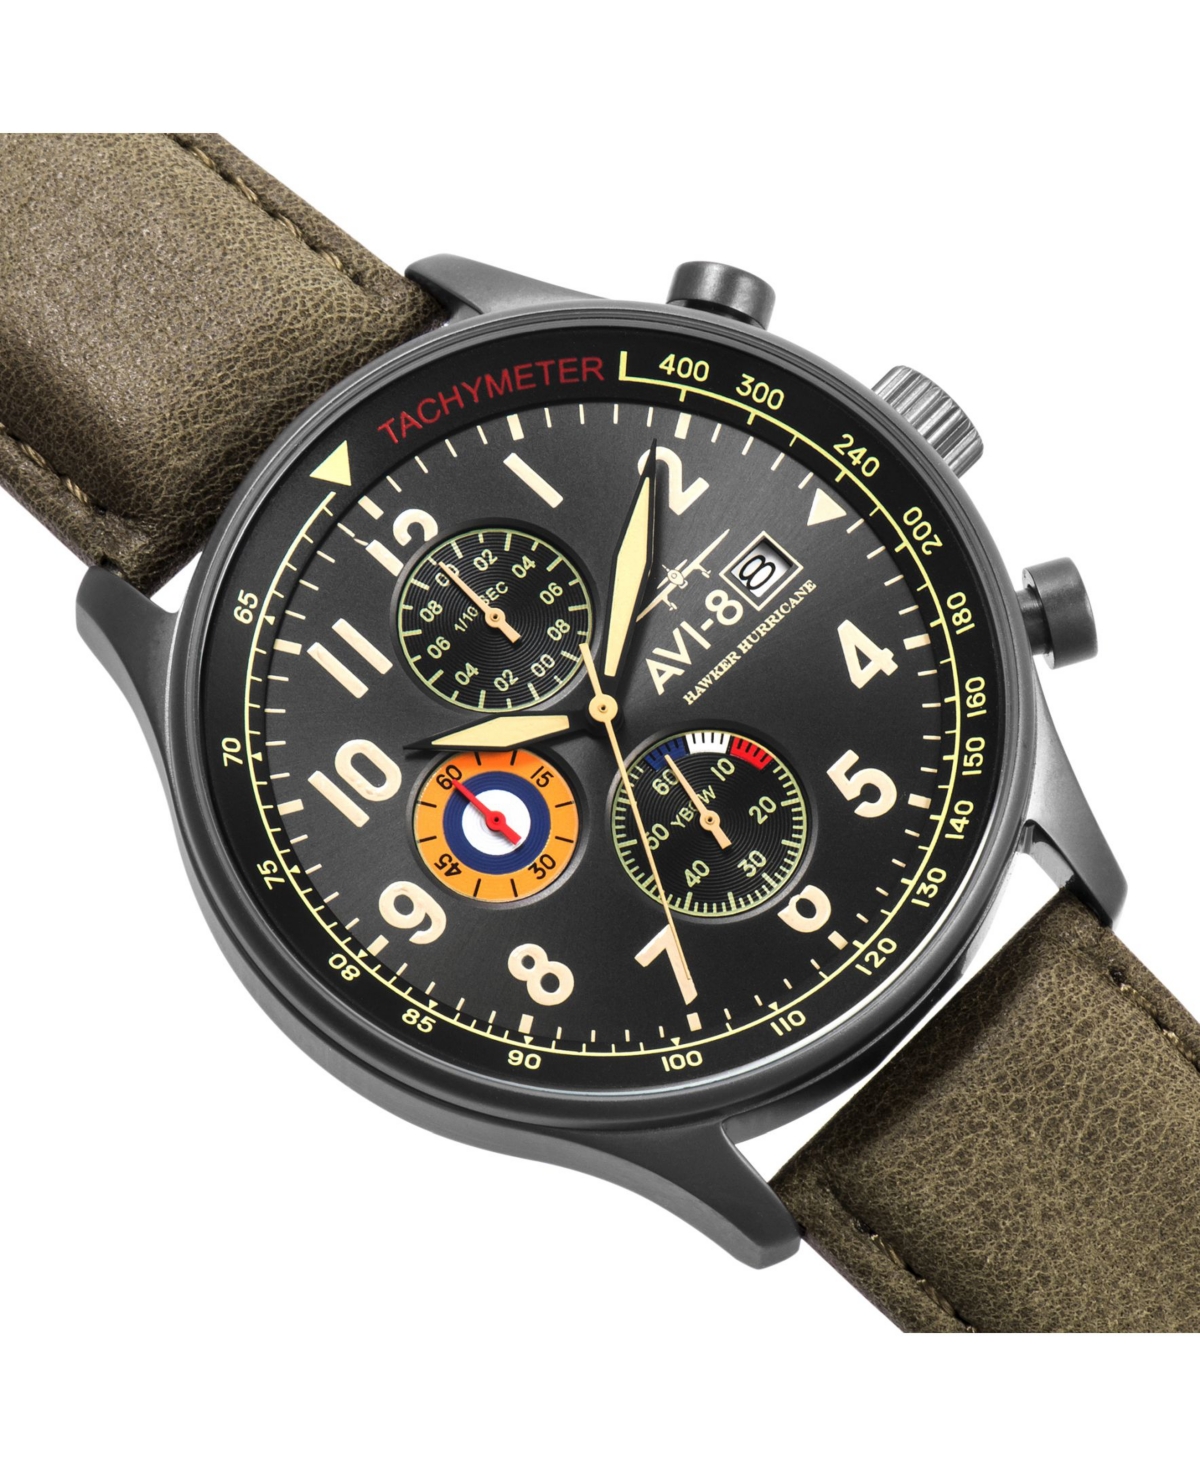 Men's Hawker Hurricane Chronograph Army Green Genuine Leather Strap Watch 42mm - Green